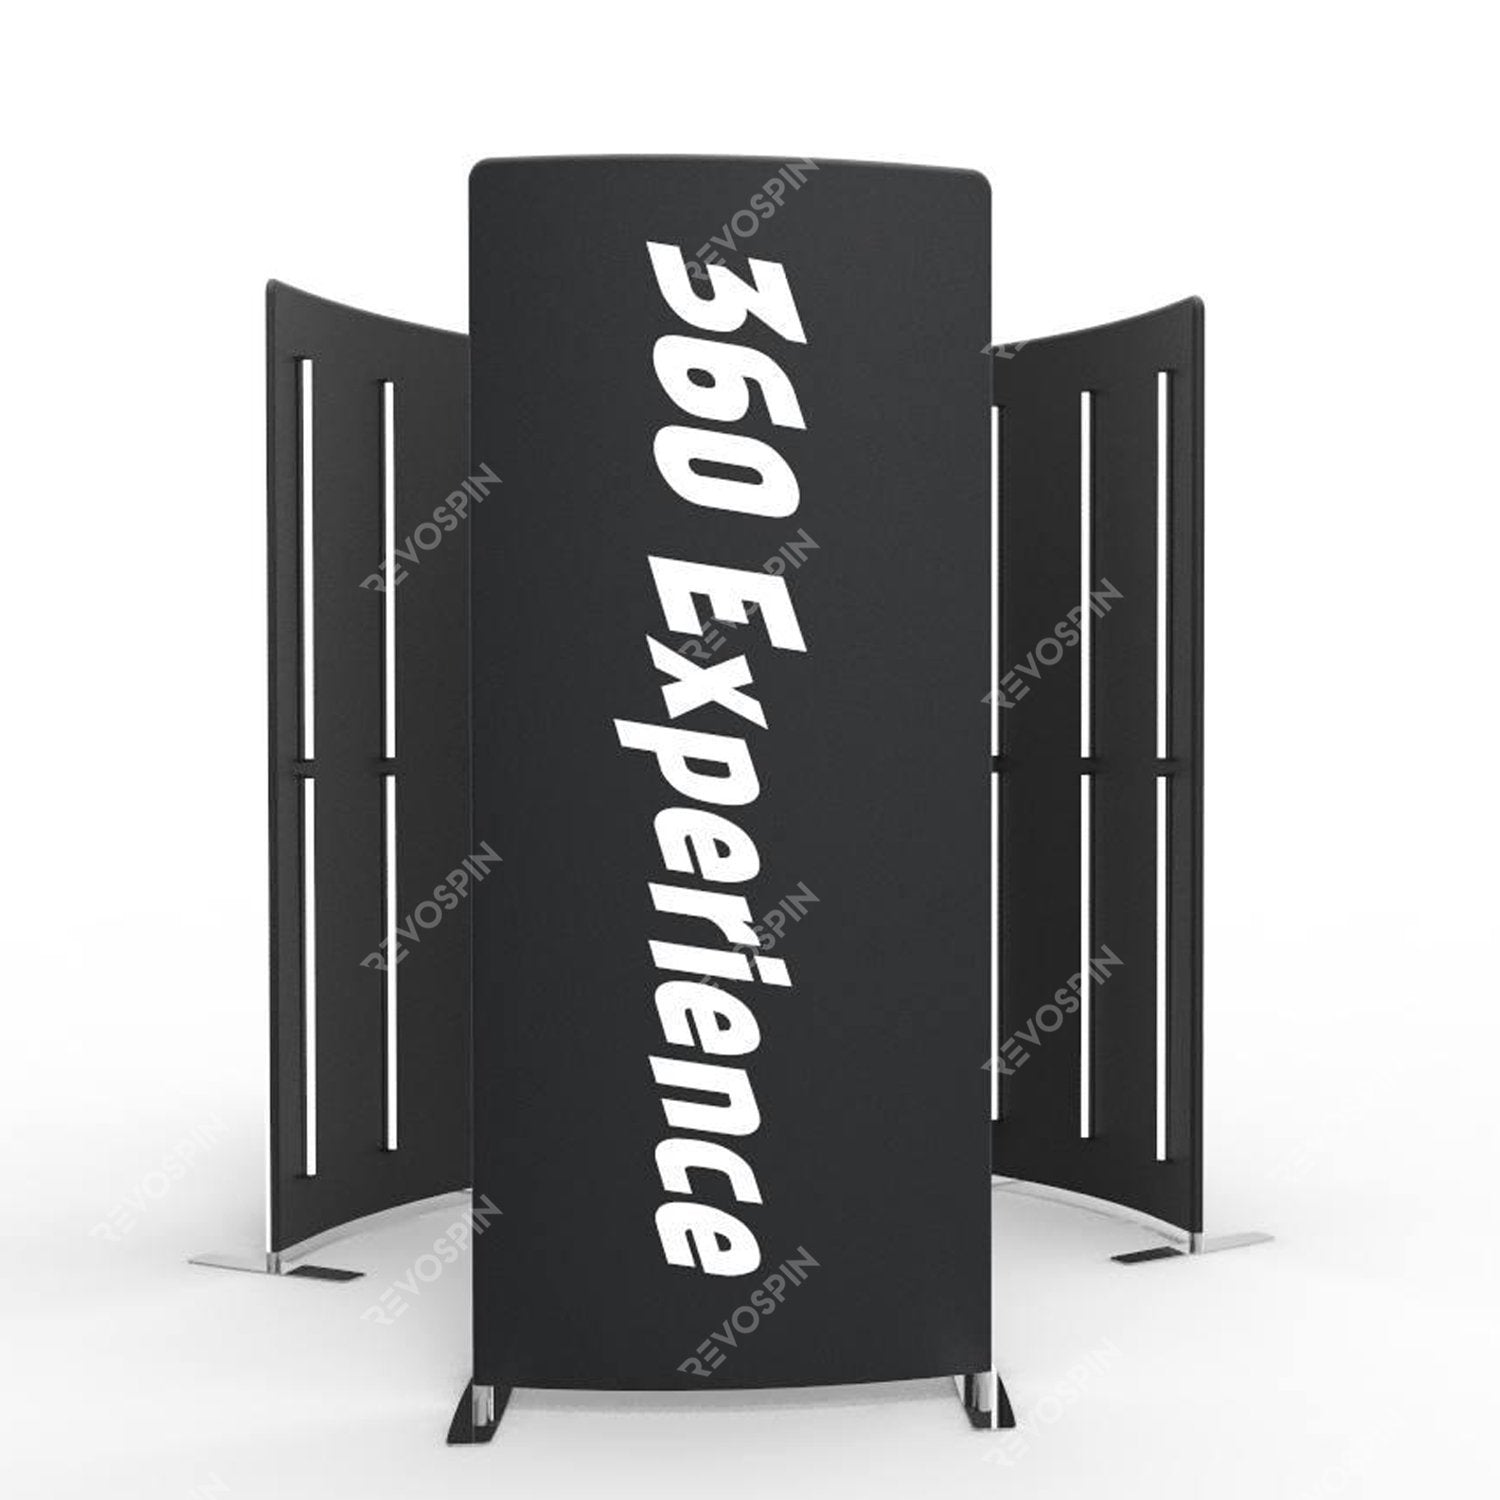 The Apex 360 Photo Booth Enclosure - VS Booths 360